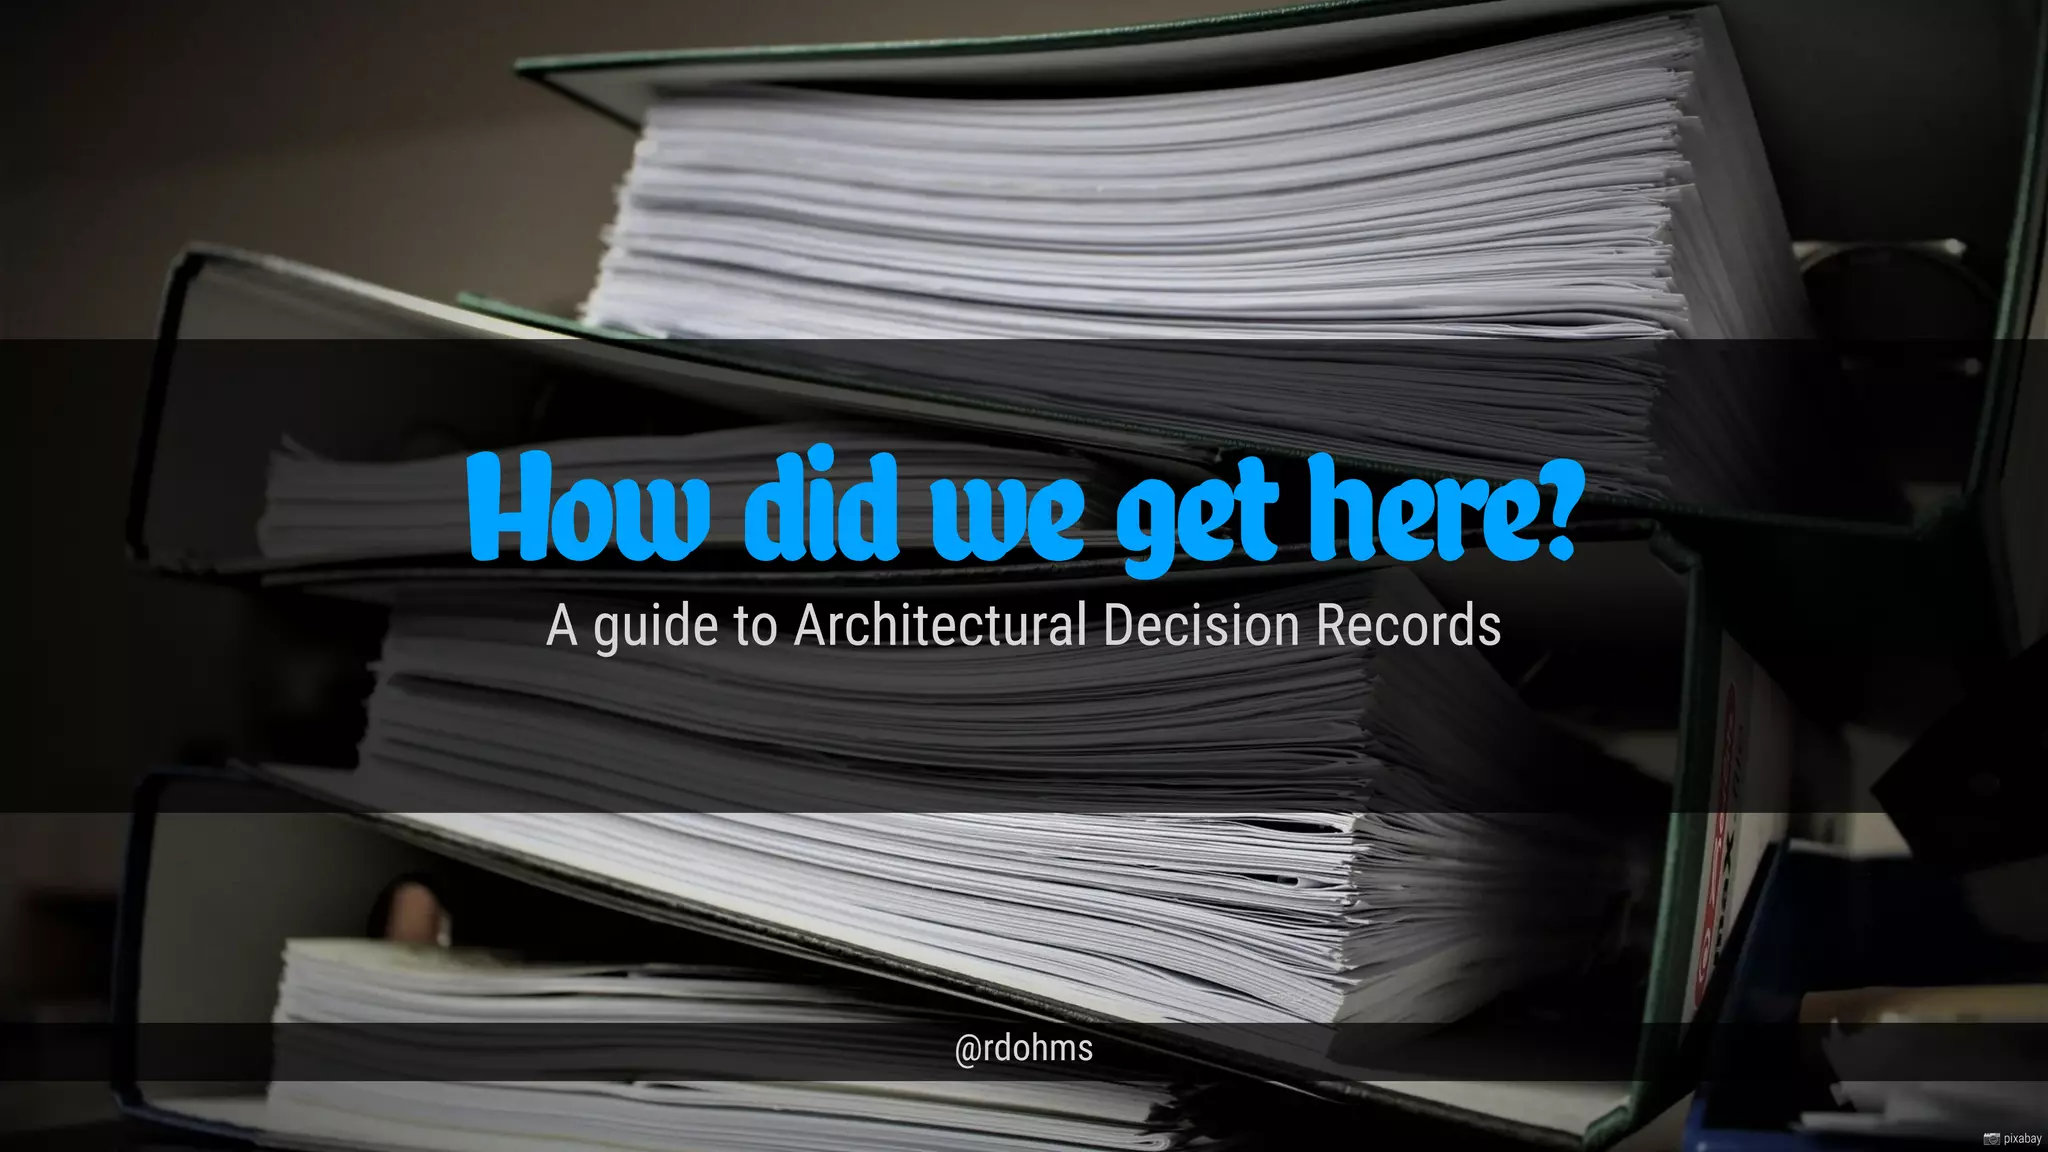 How'd we get here? A guide to Architectural Decision Records